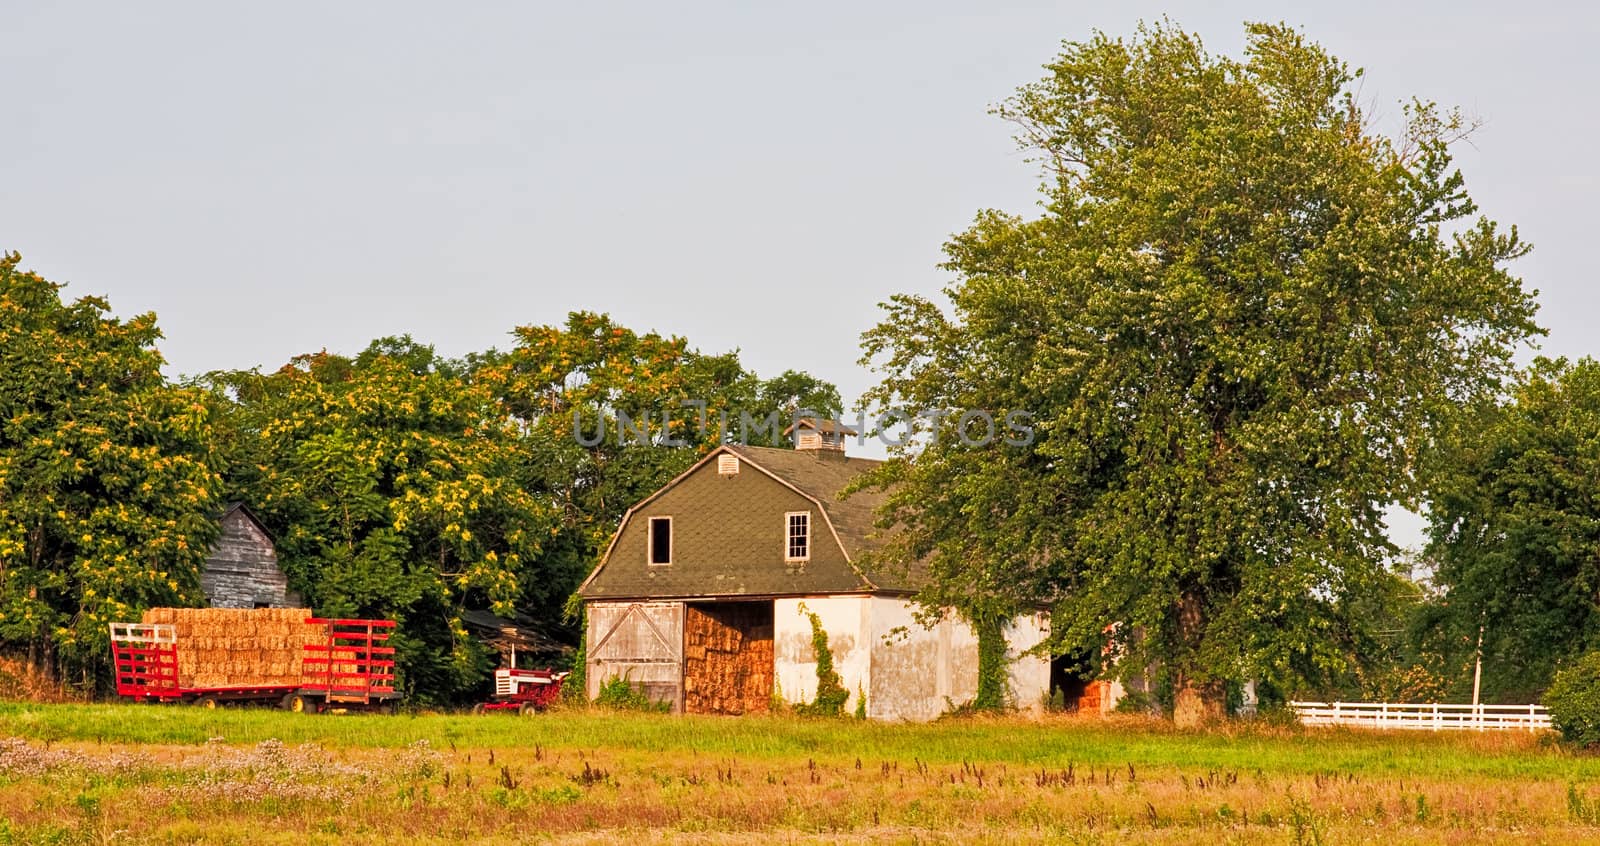 Country Barn Panorama by sbonk